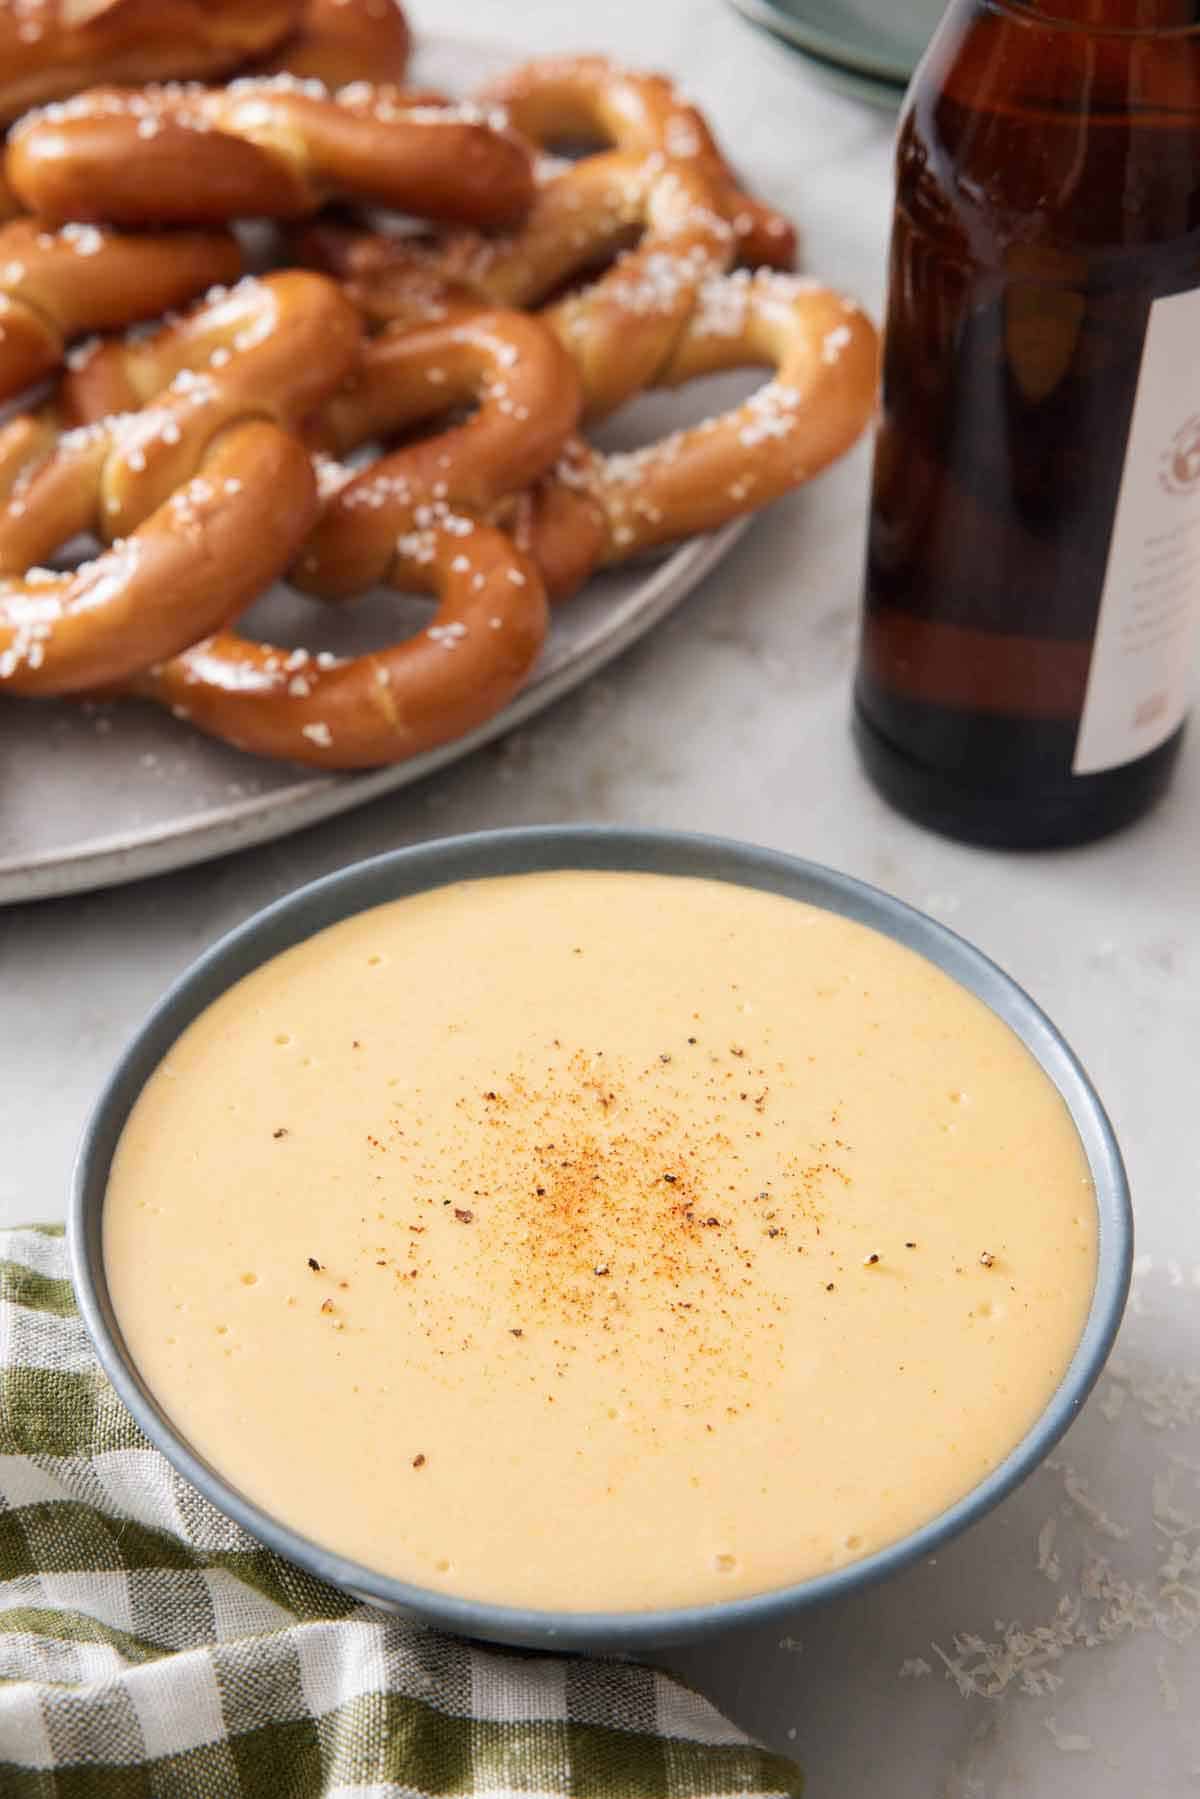 A bowl of beer cheese dip with a platter of pretzels and a bottle of beer in the background.